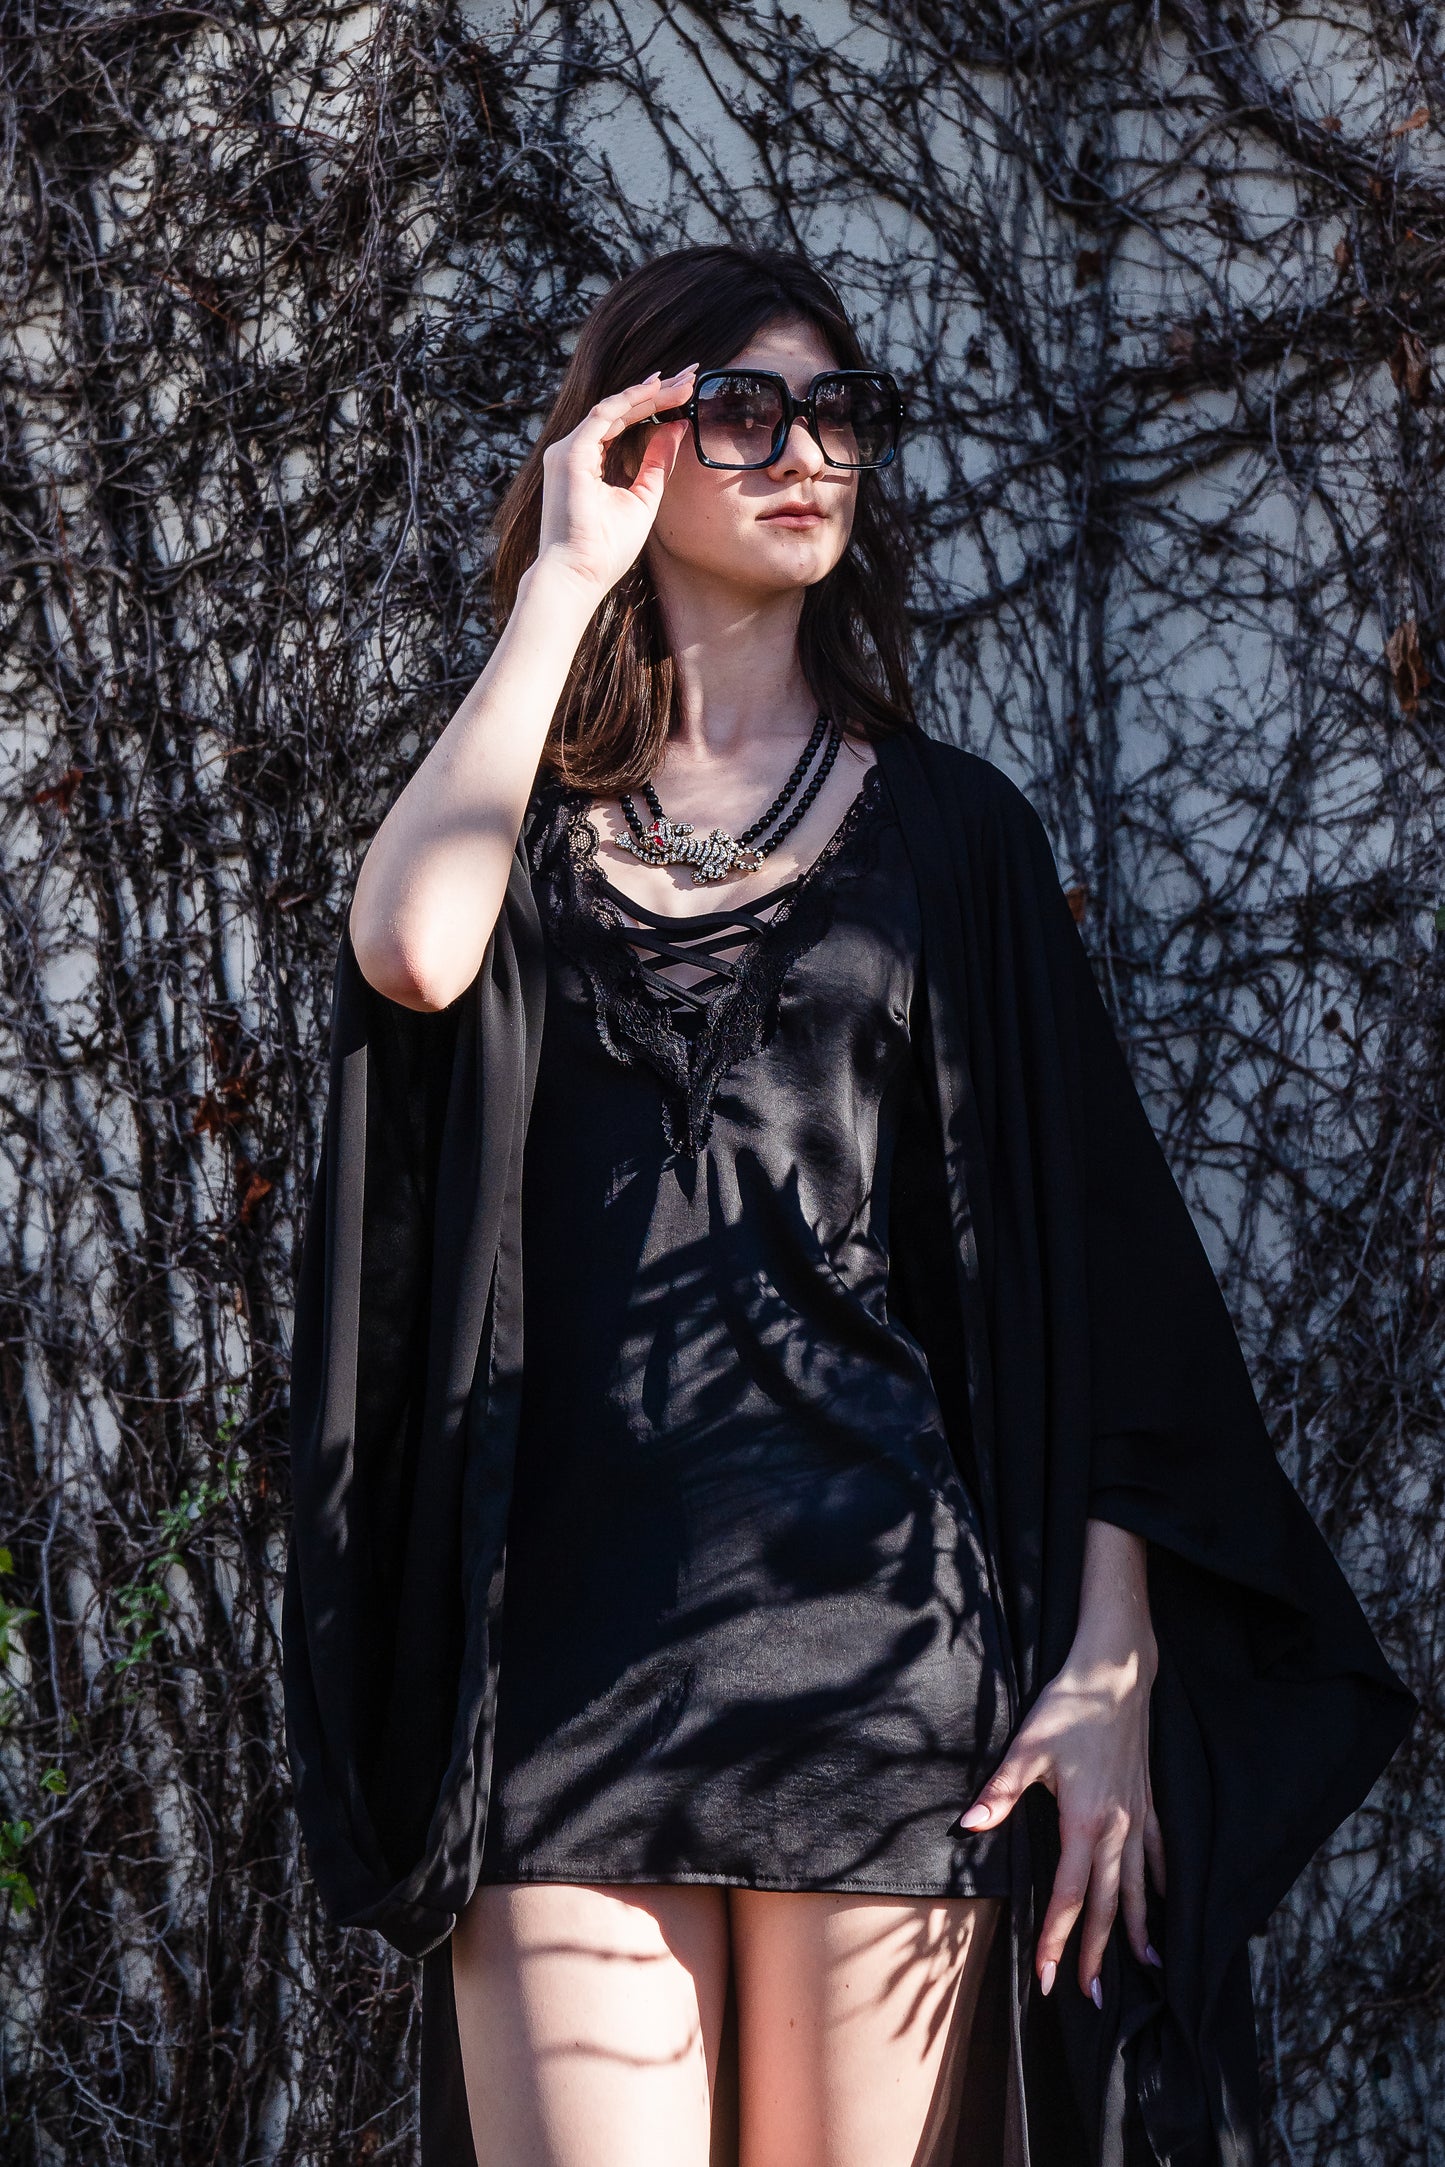 Jennafer Grace solid black fashion kimono robe. Featuring a wrap tie waist for a cinched look, v-neck, square sleeves, and an ankle length hem. Classic, bohemian retro aesthetic.